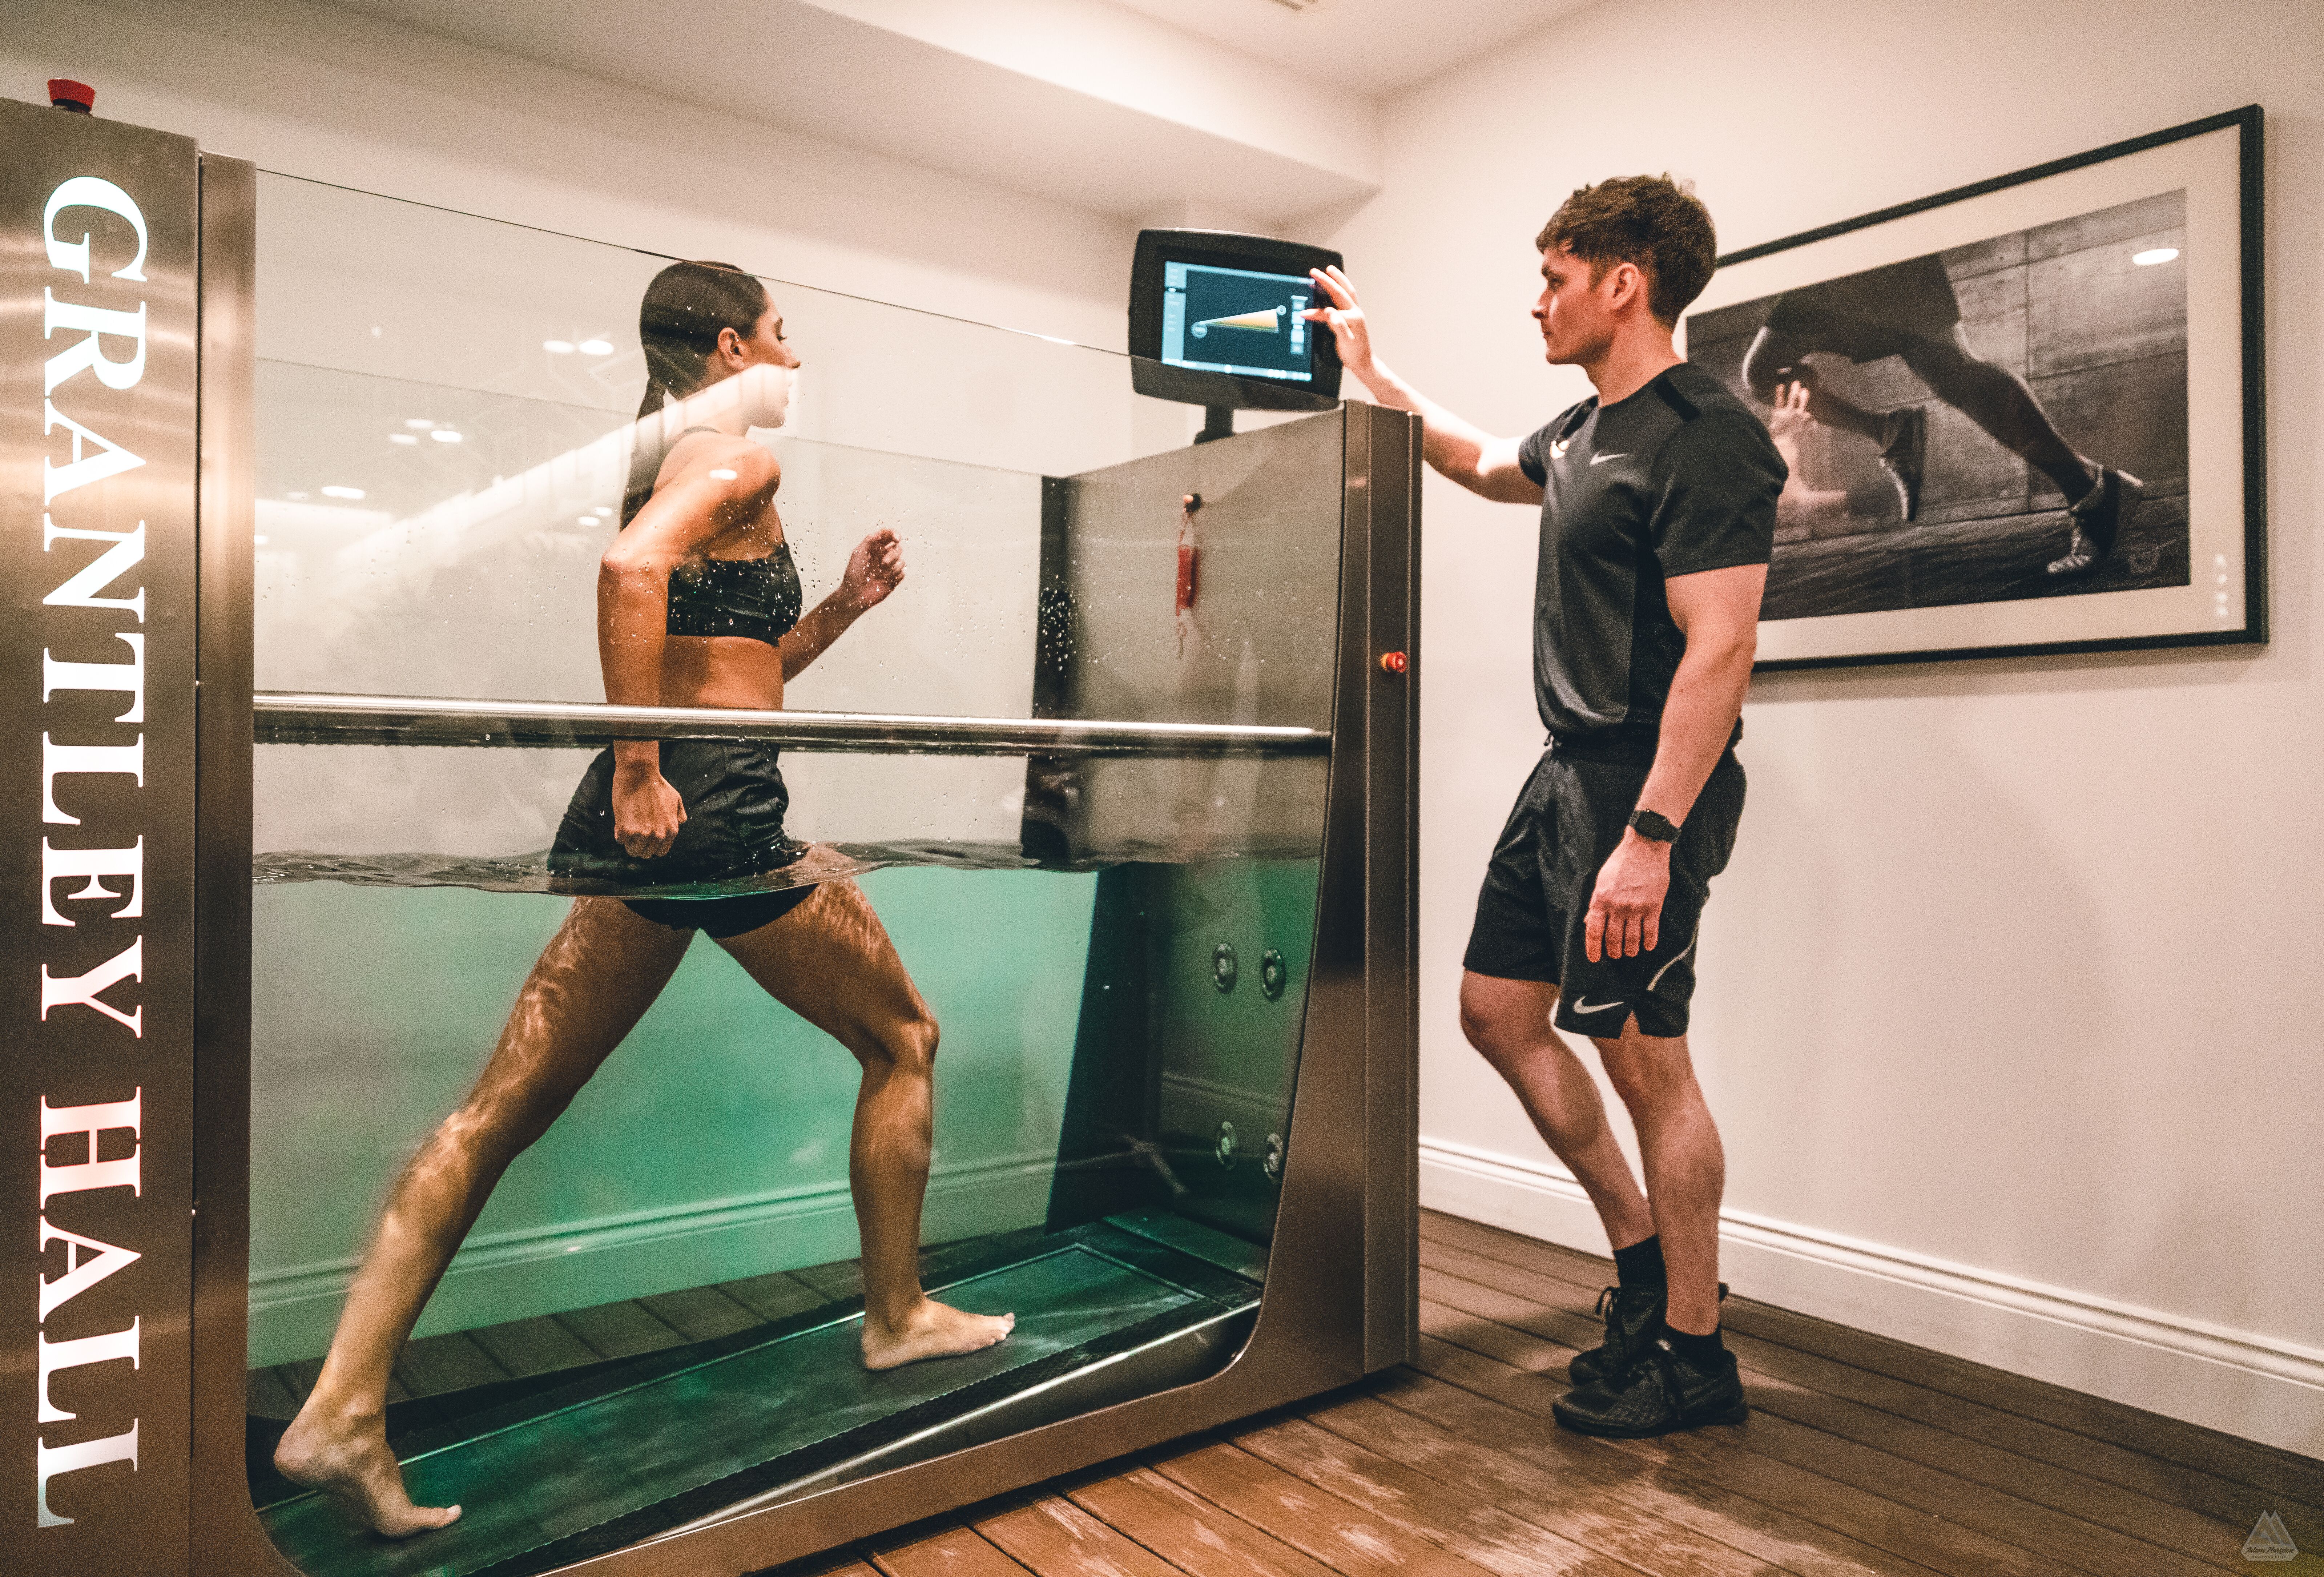 Water resistance training at Grantley Hall in Yorkshire, United Kingdom